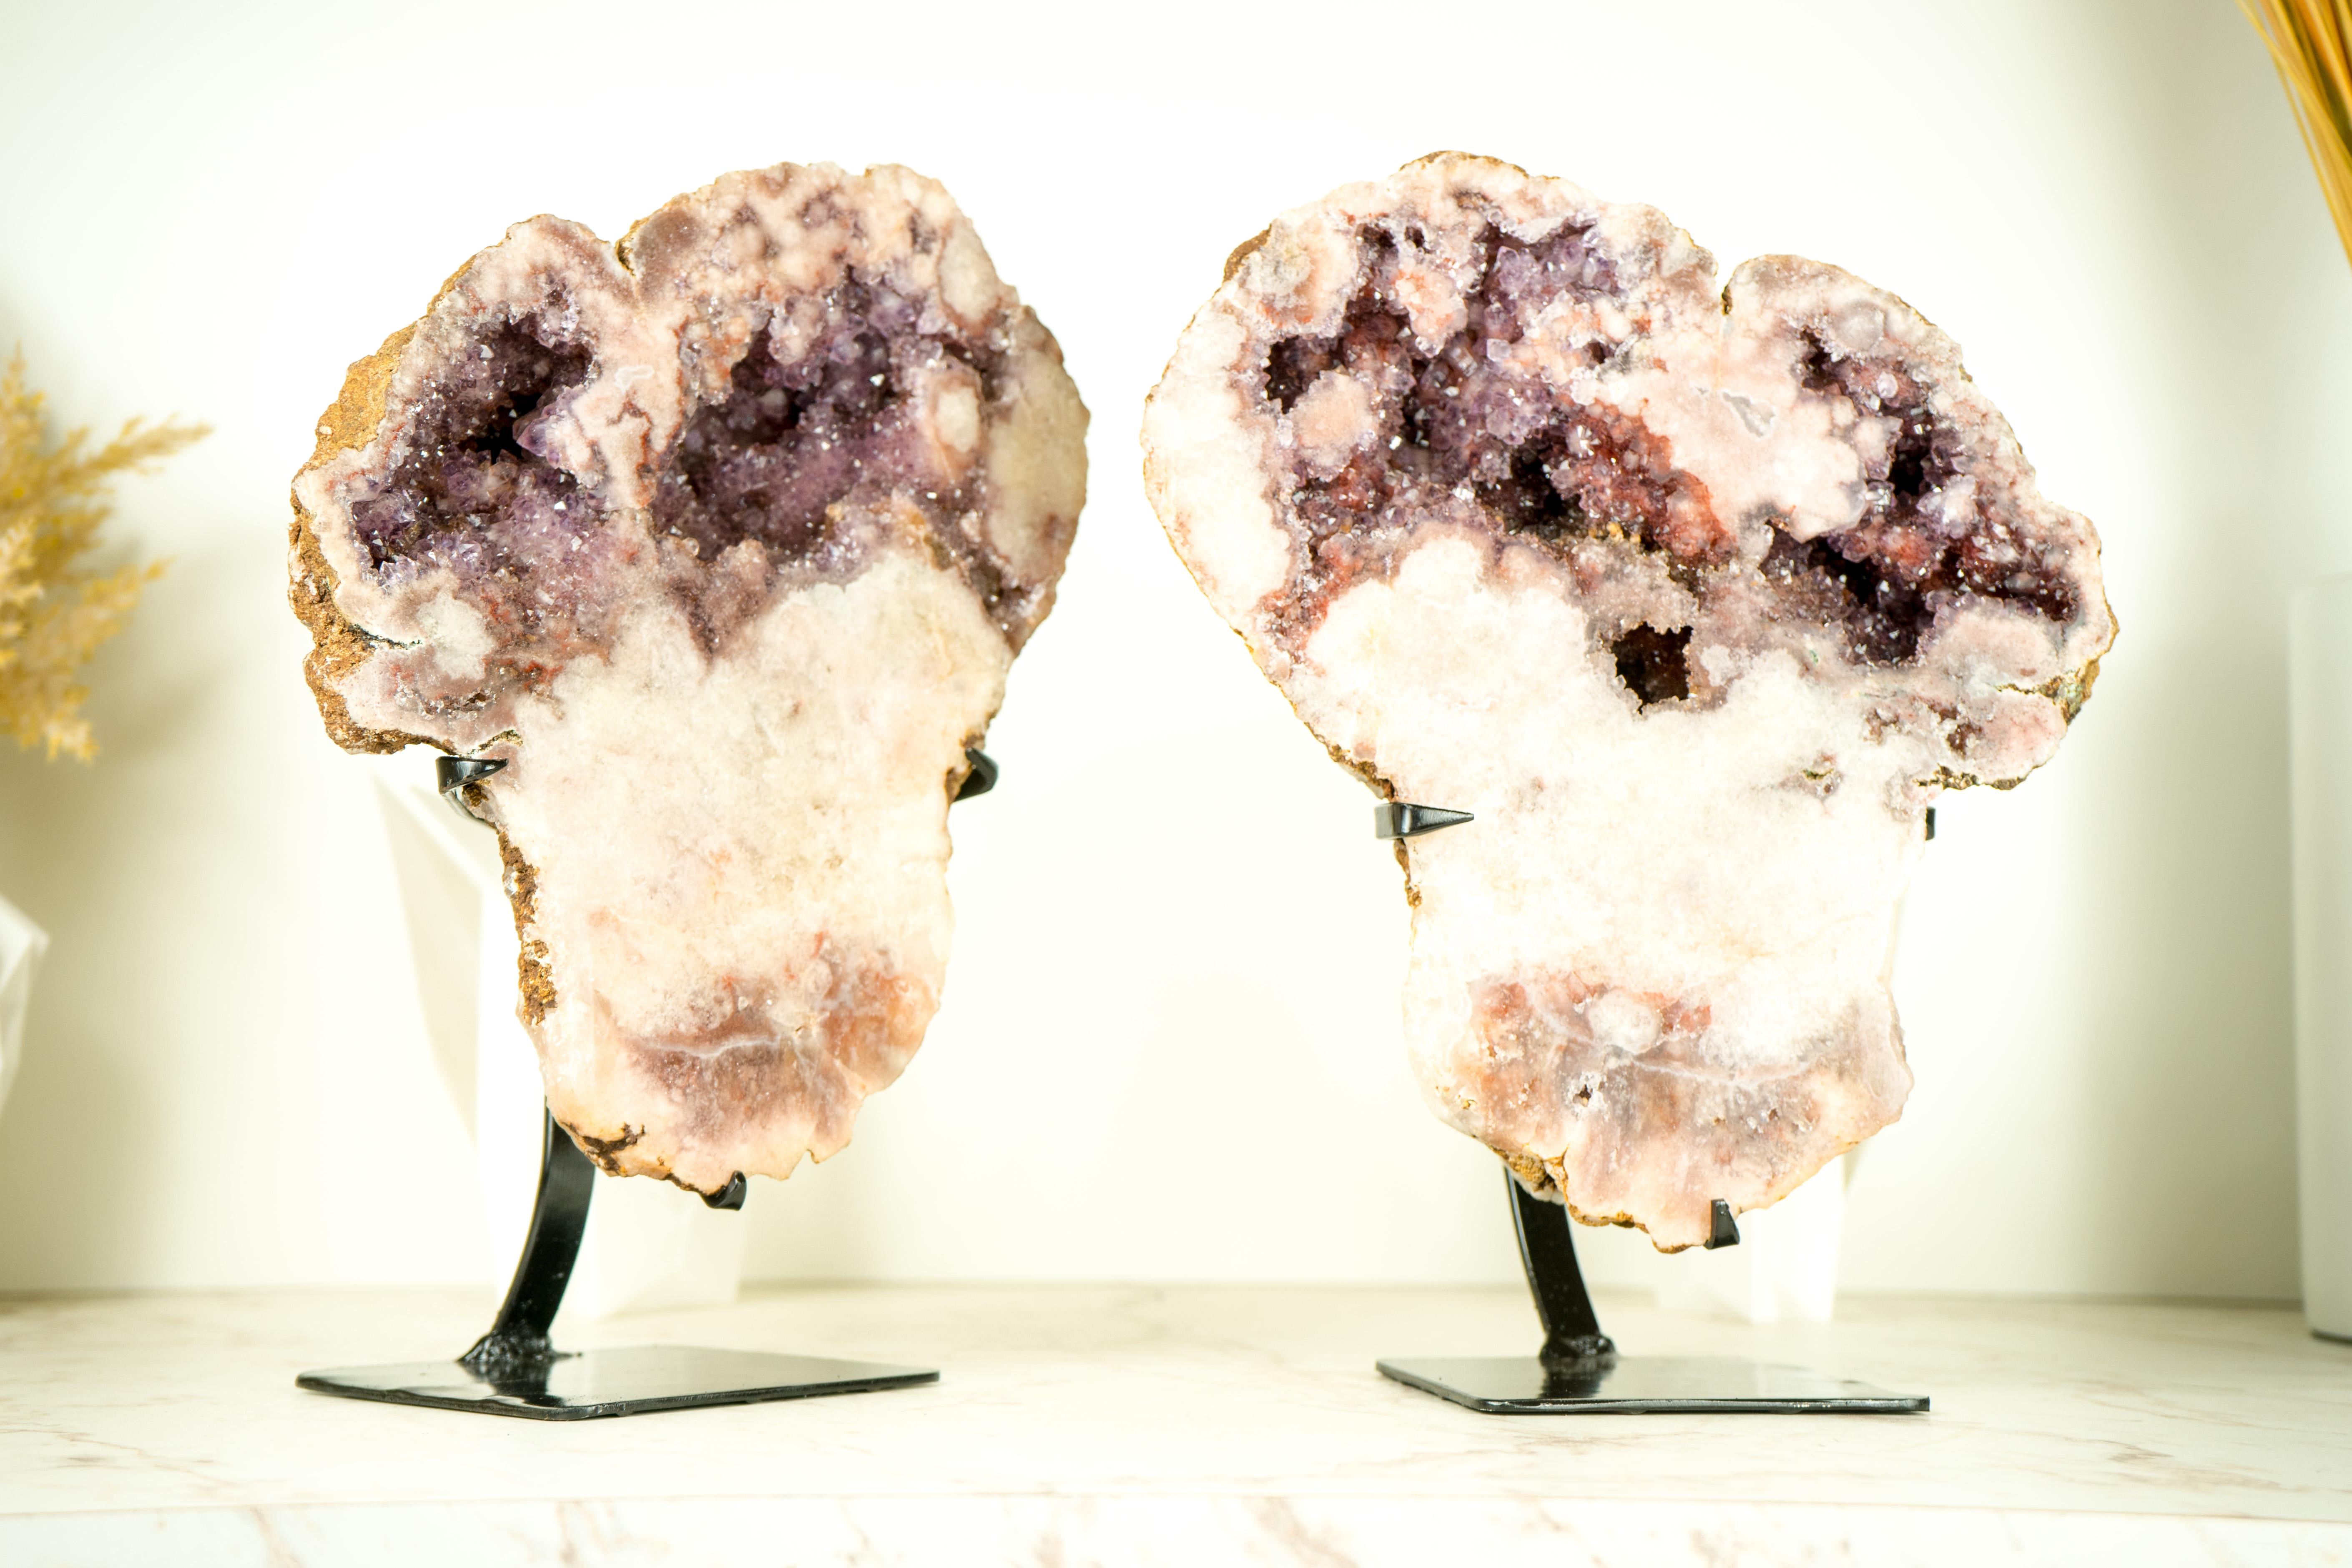 High-Grade Pink Amethyst Geode Pair with Rare Red and Lavender Pink Amethyst Druzy

▫️ Description

This pair of naturally beautiful Pink Amethyst geodes presents a stunning mix of colors, each as if they were masterfully painted. One geode features